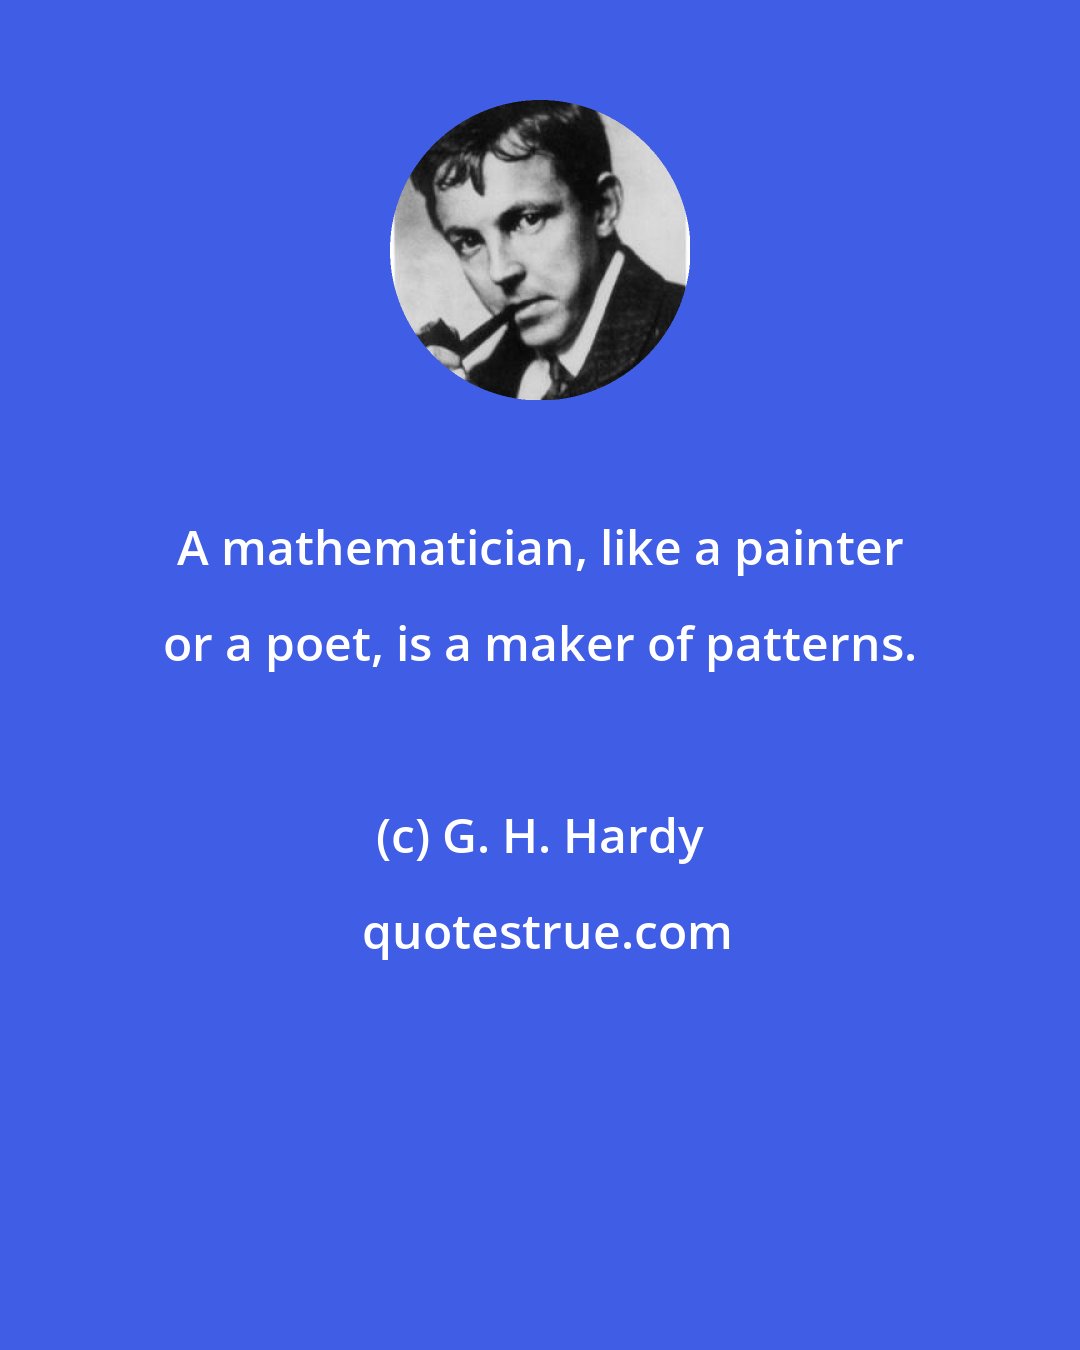 G. H. Hardy: A mathematician, like a painter or a poet, is a maker of patterns.